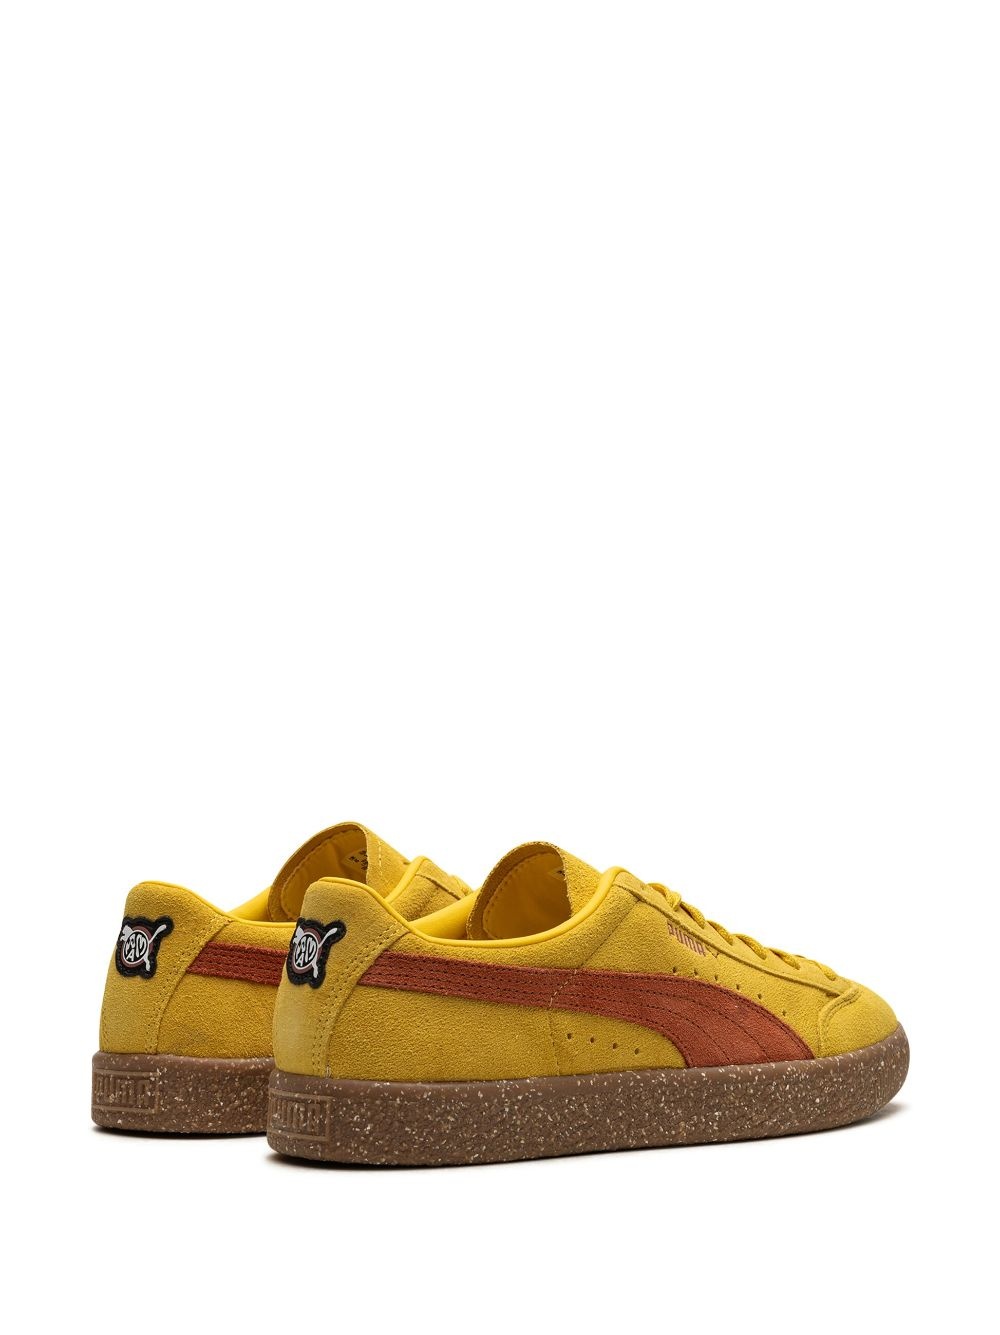 x P.A.M Suede VTG sneakers - 3